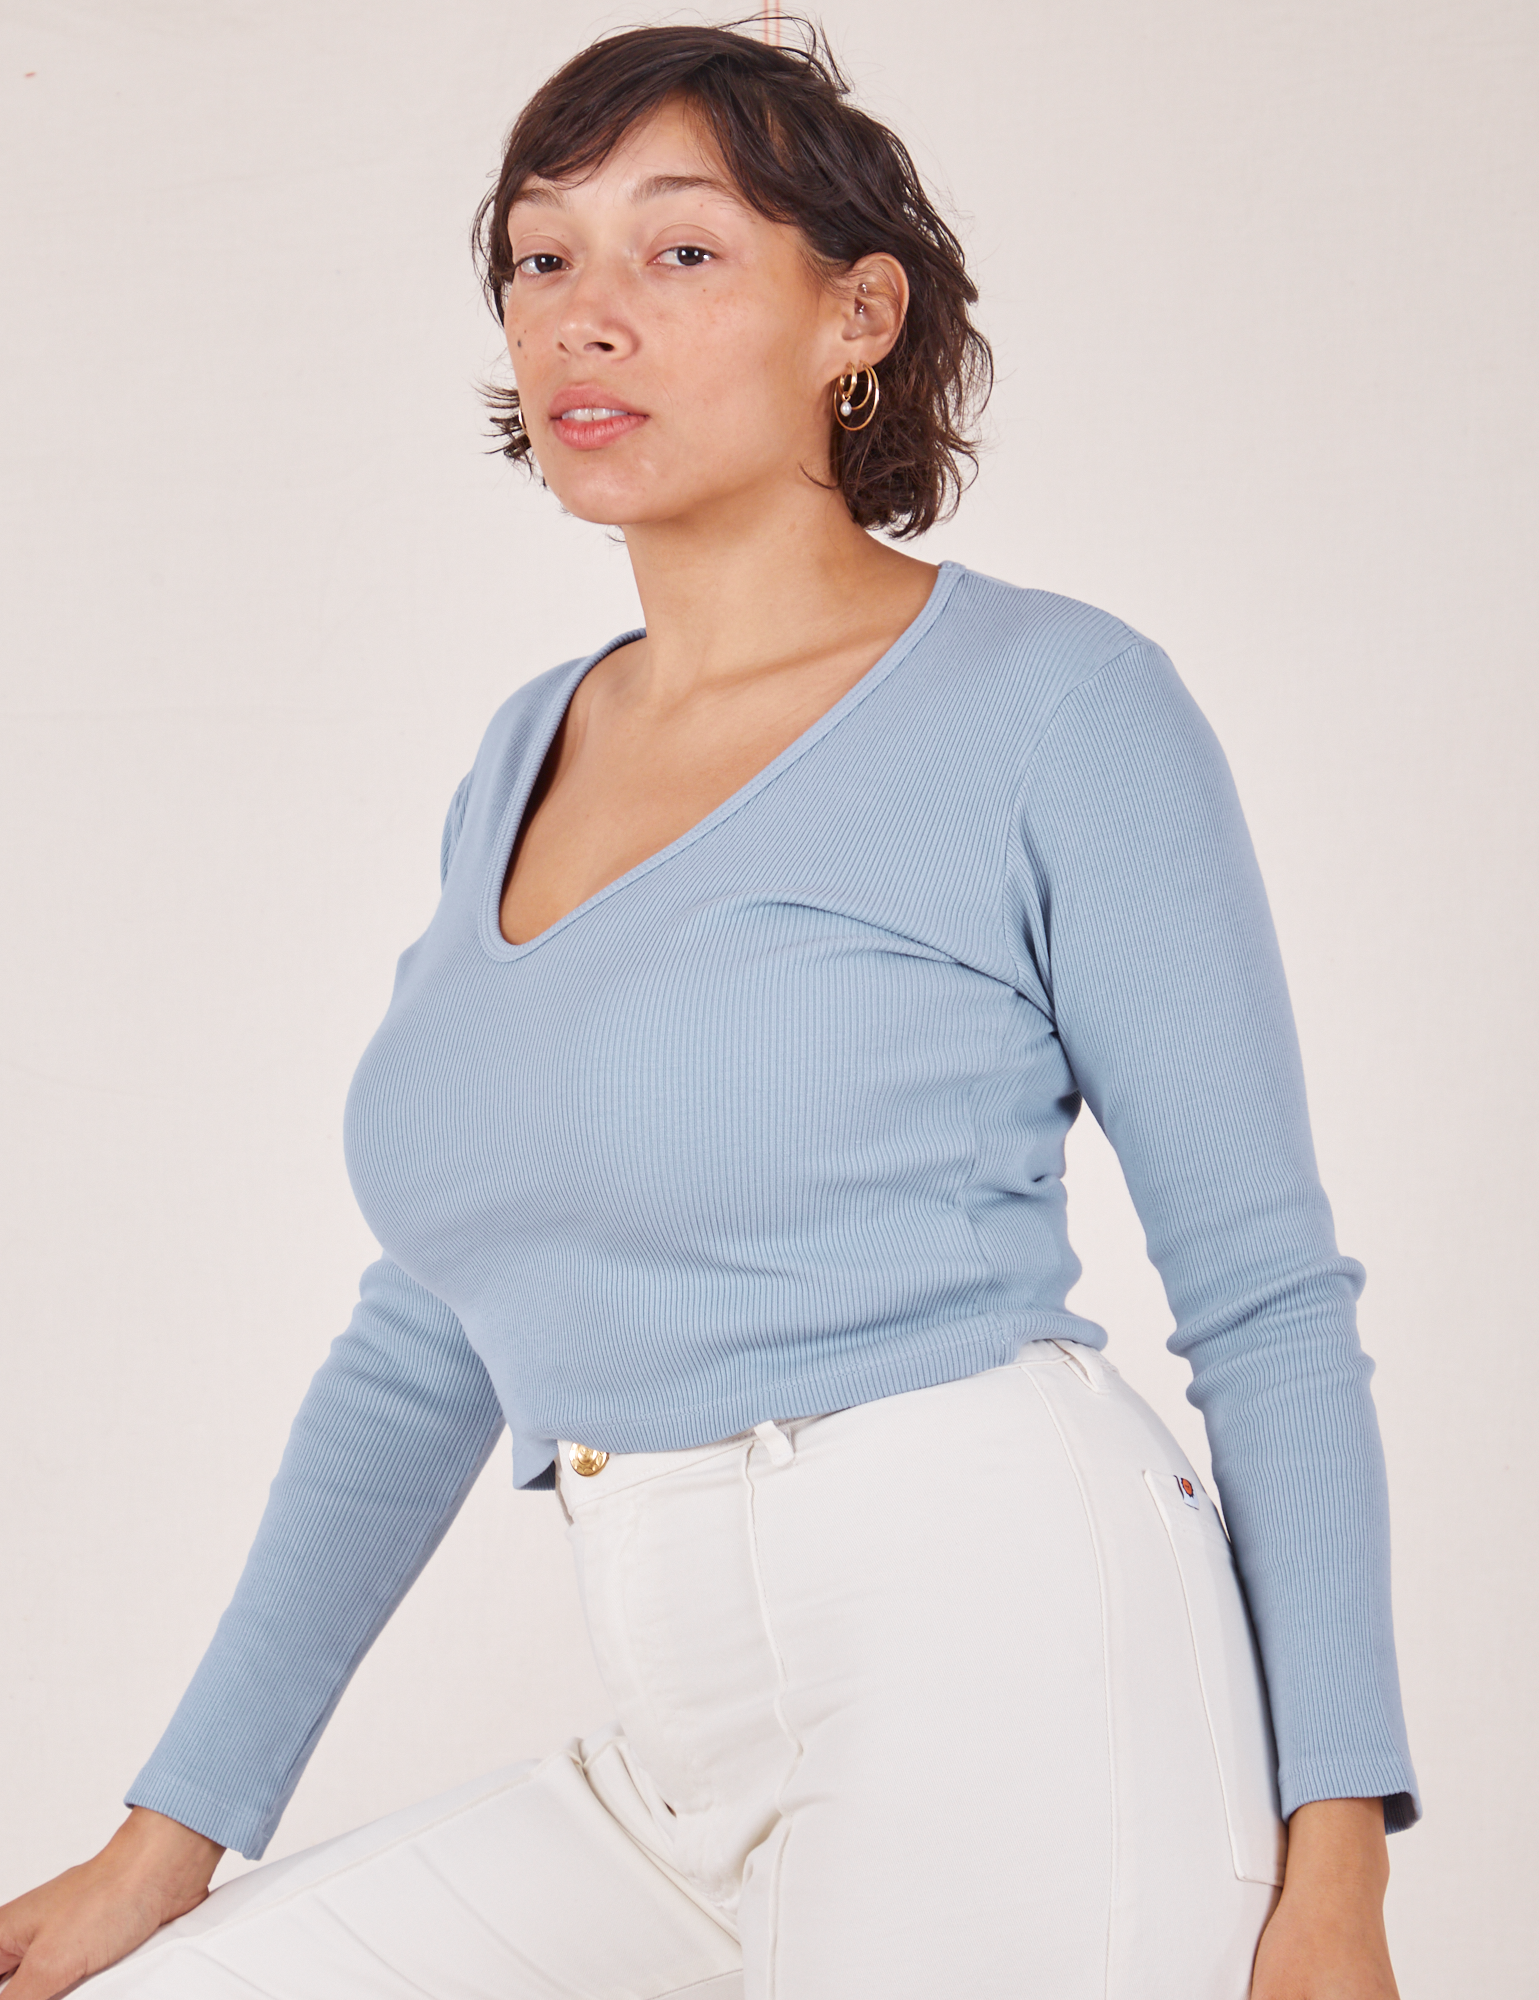 Tiara is 5&#39;4&quot; and wearing XS Long Sleeve V-Neck Tee in Periwinkle